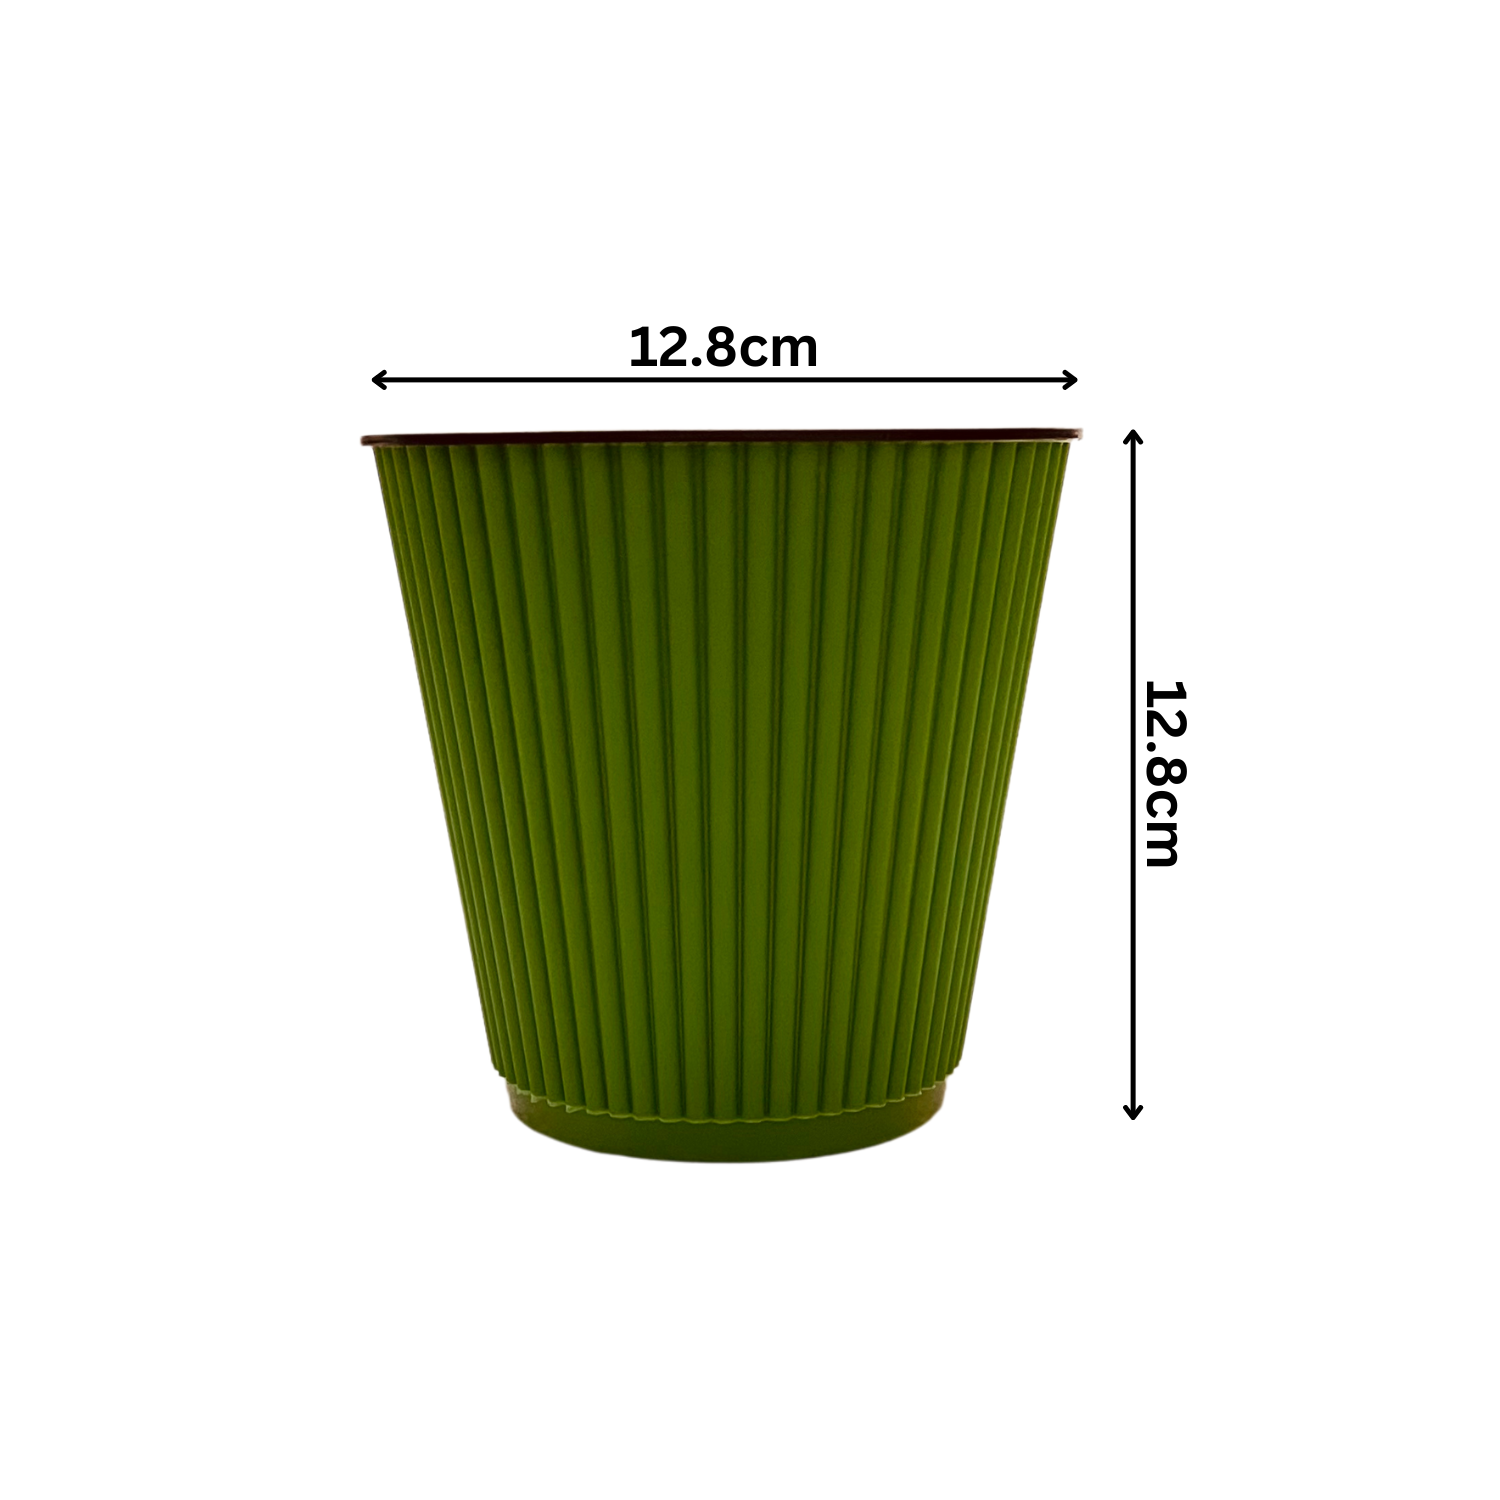 Kia 12.8cm Round Pot With Inner Planters for Home, Office, Home & Garden (12.8CM | 5INCH)